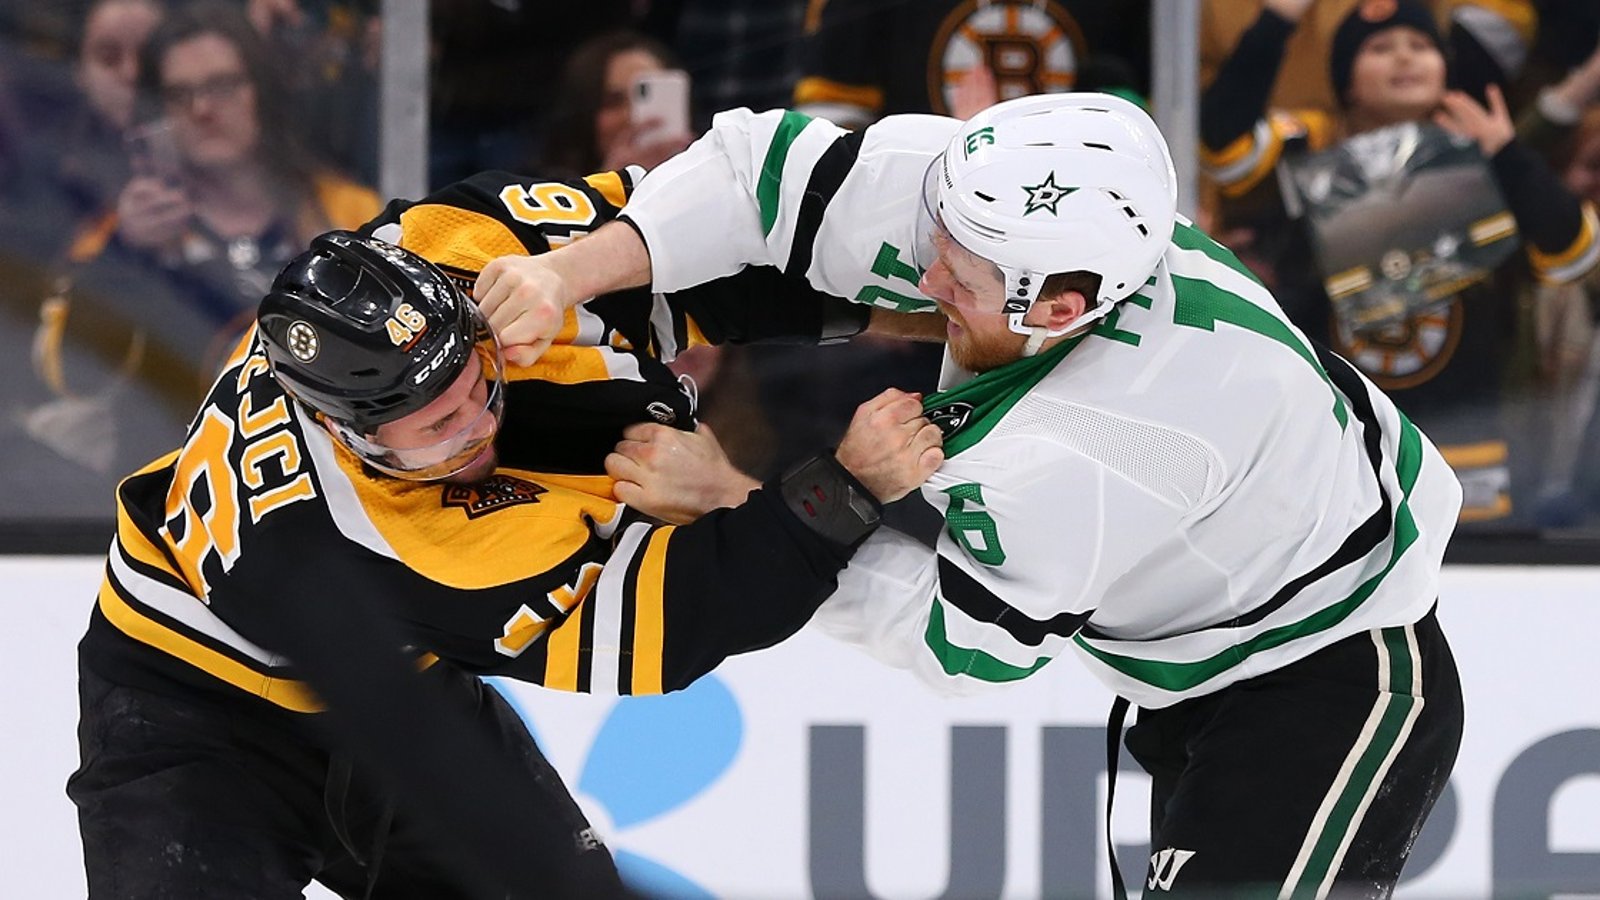 The NHL's top fights of the week.